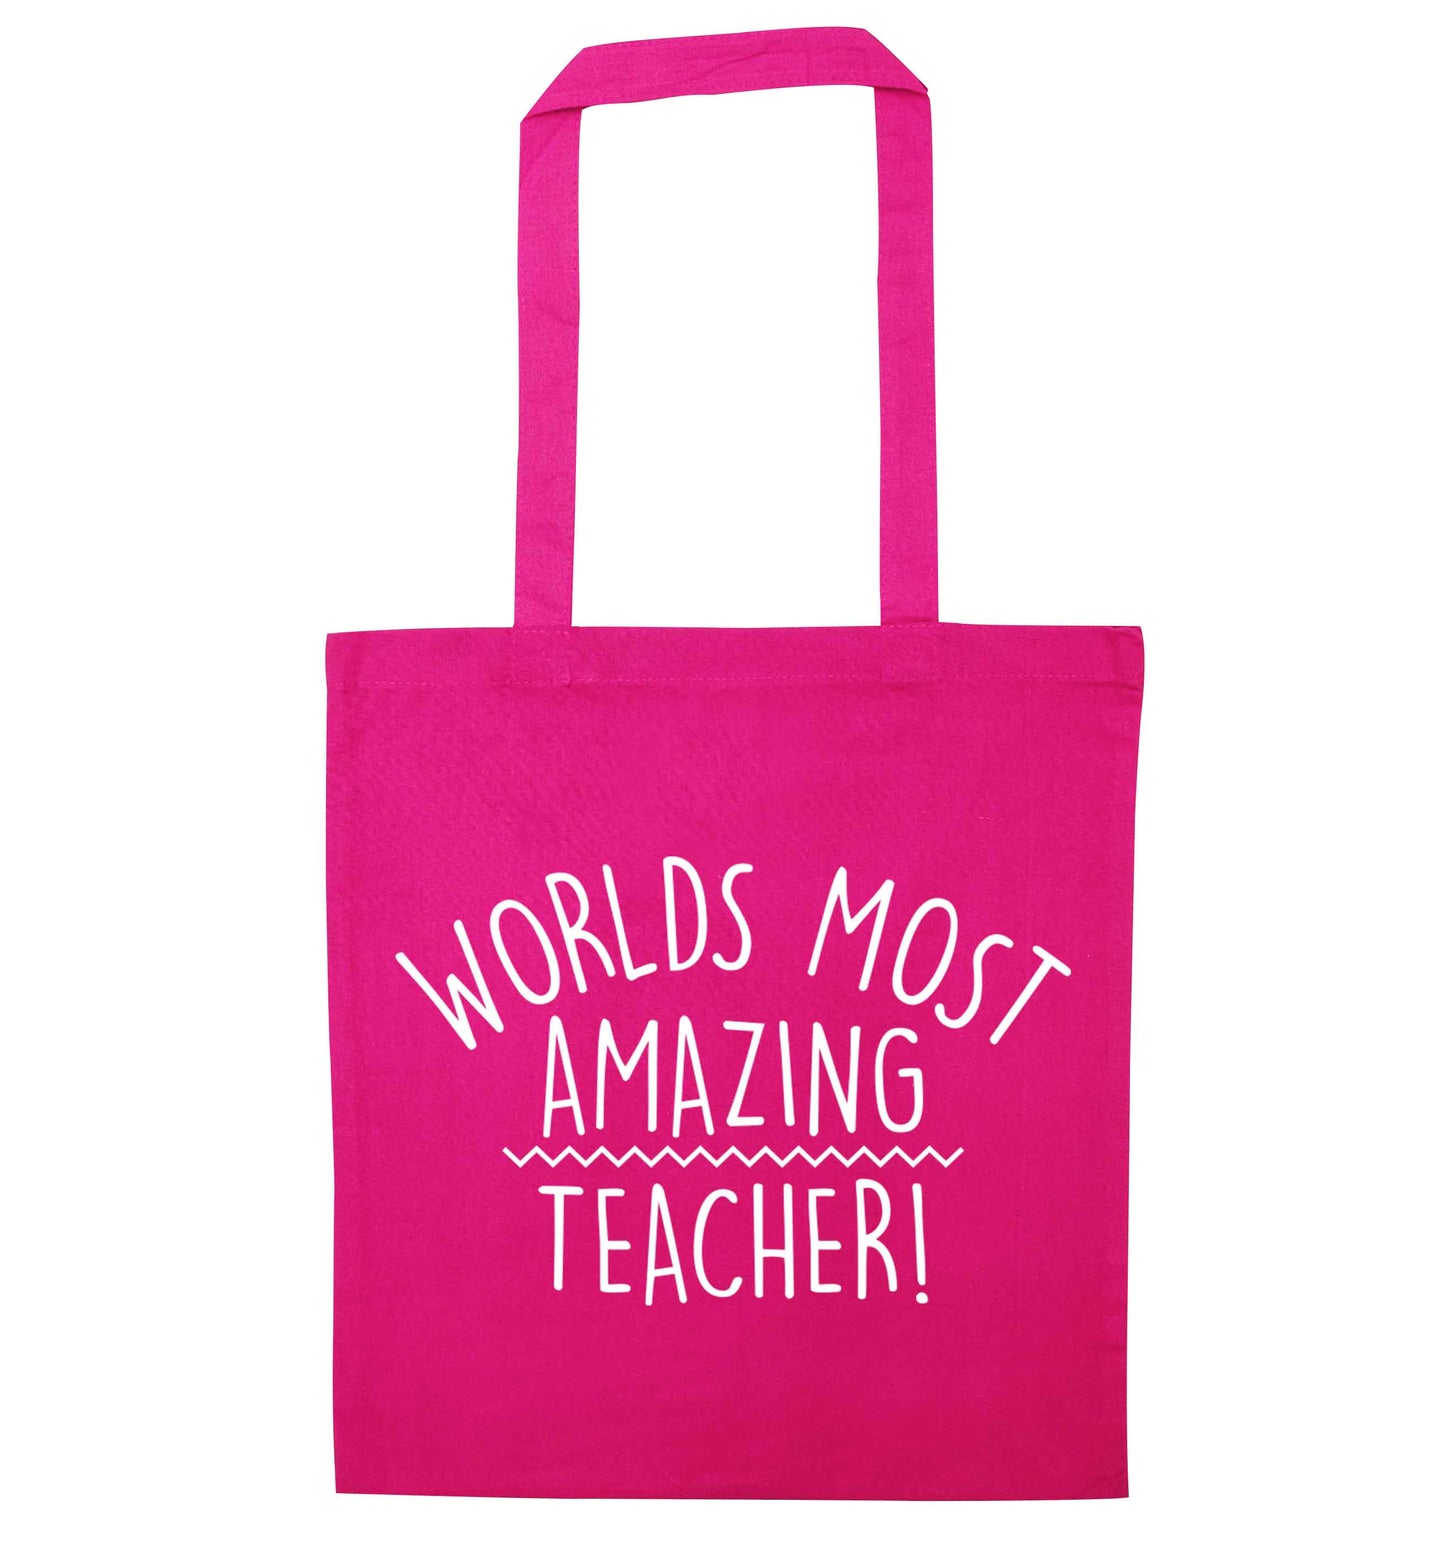 Worlds most amazing teacher pink tote bag